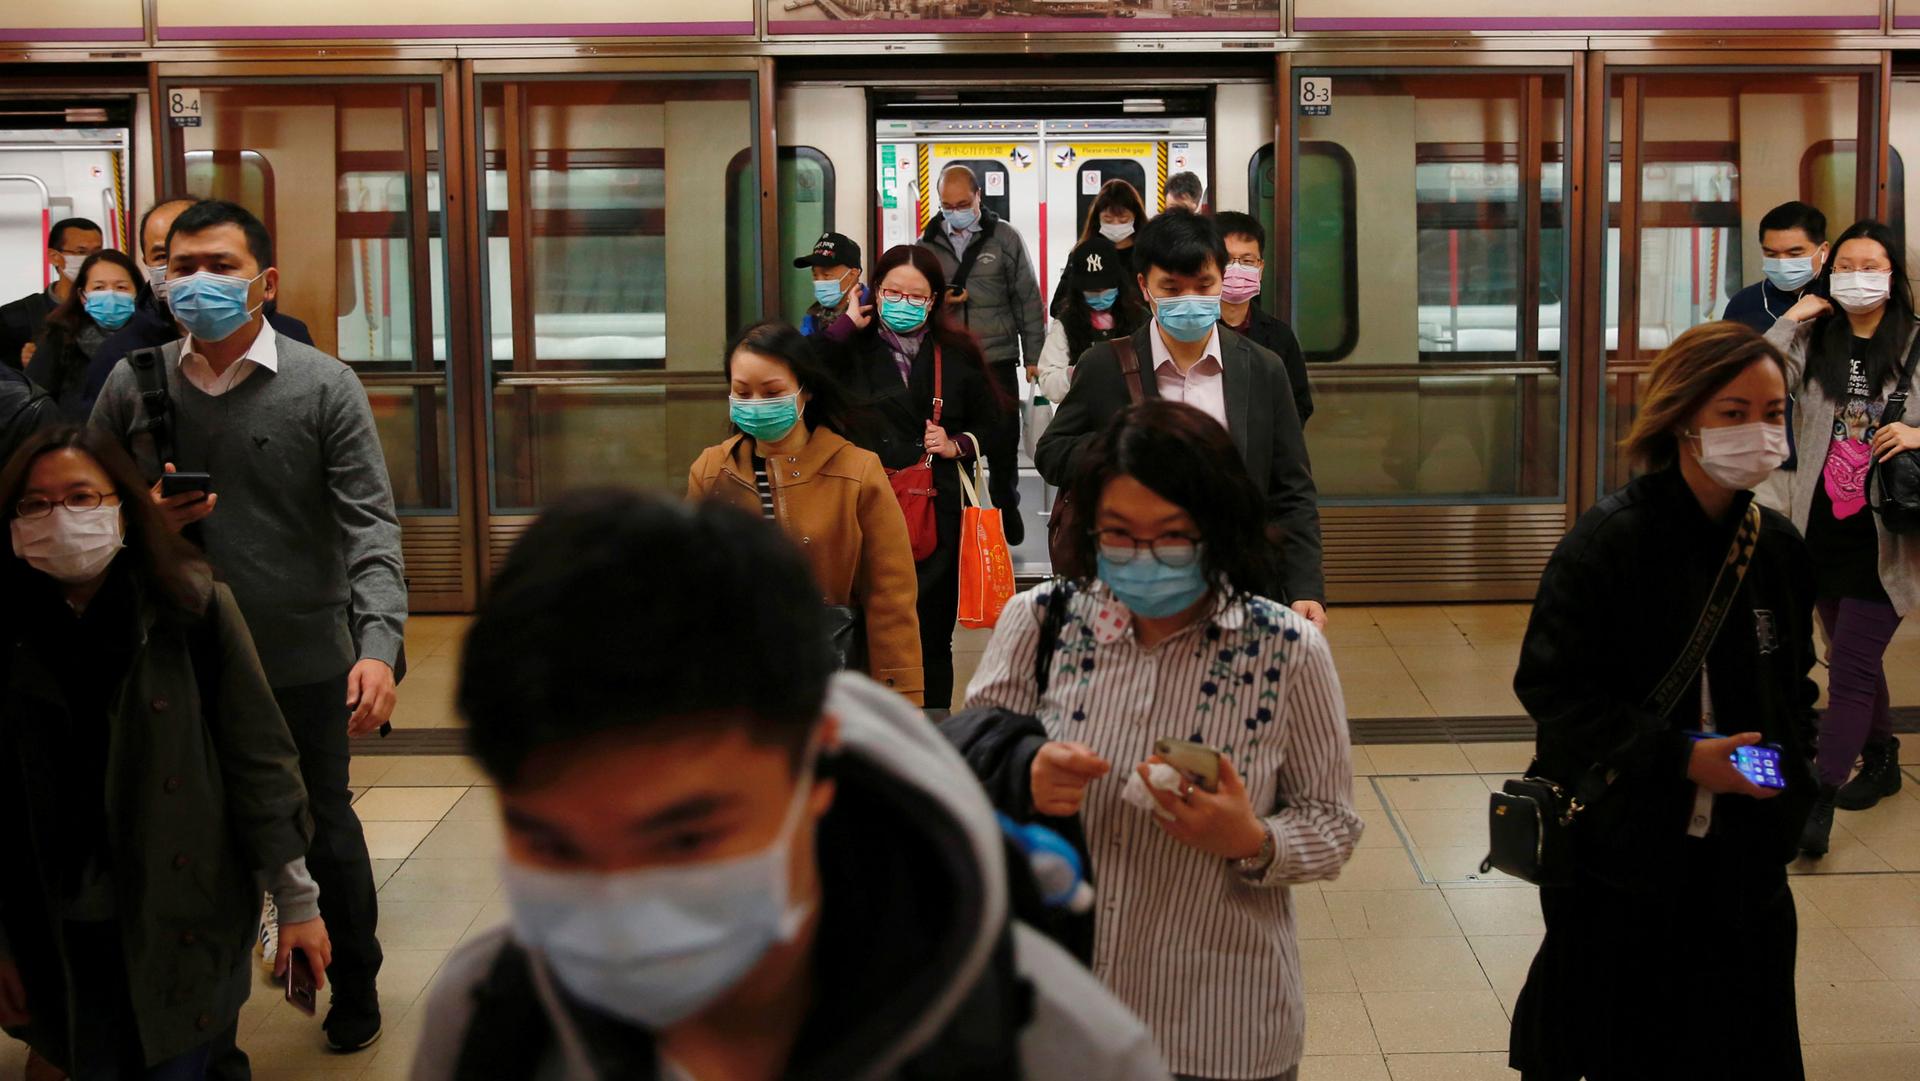 A large group of people are shown exiting a subway train, all wearing blue surgical masks.